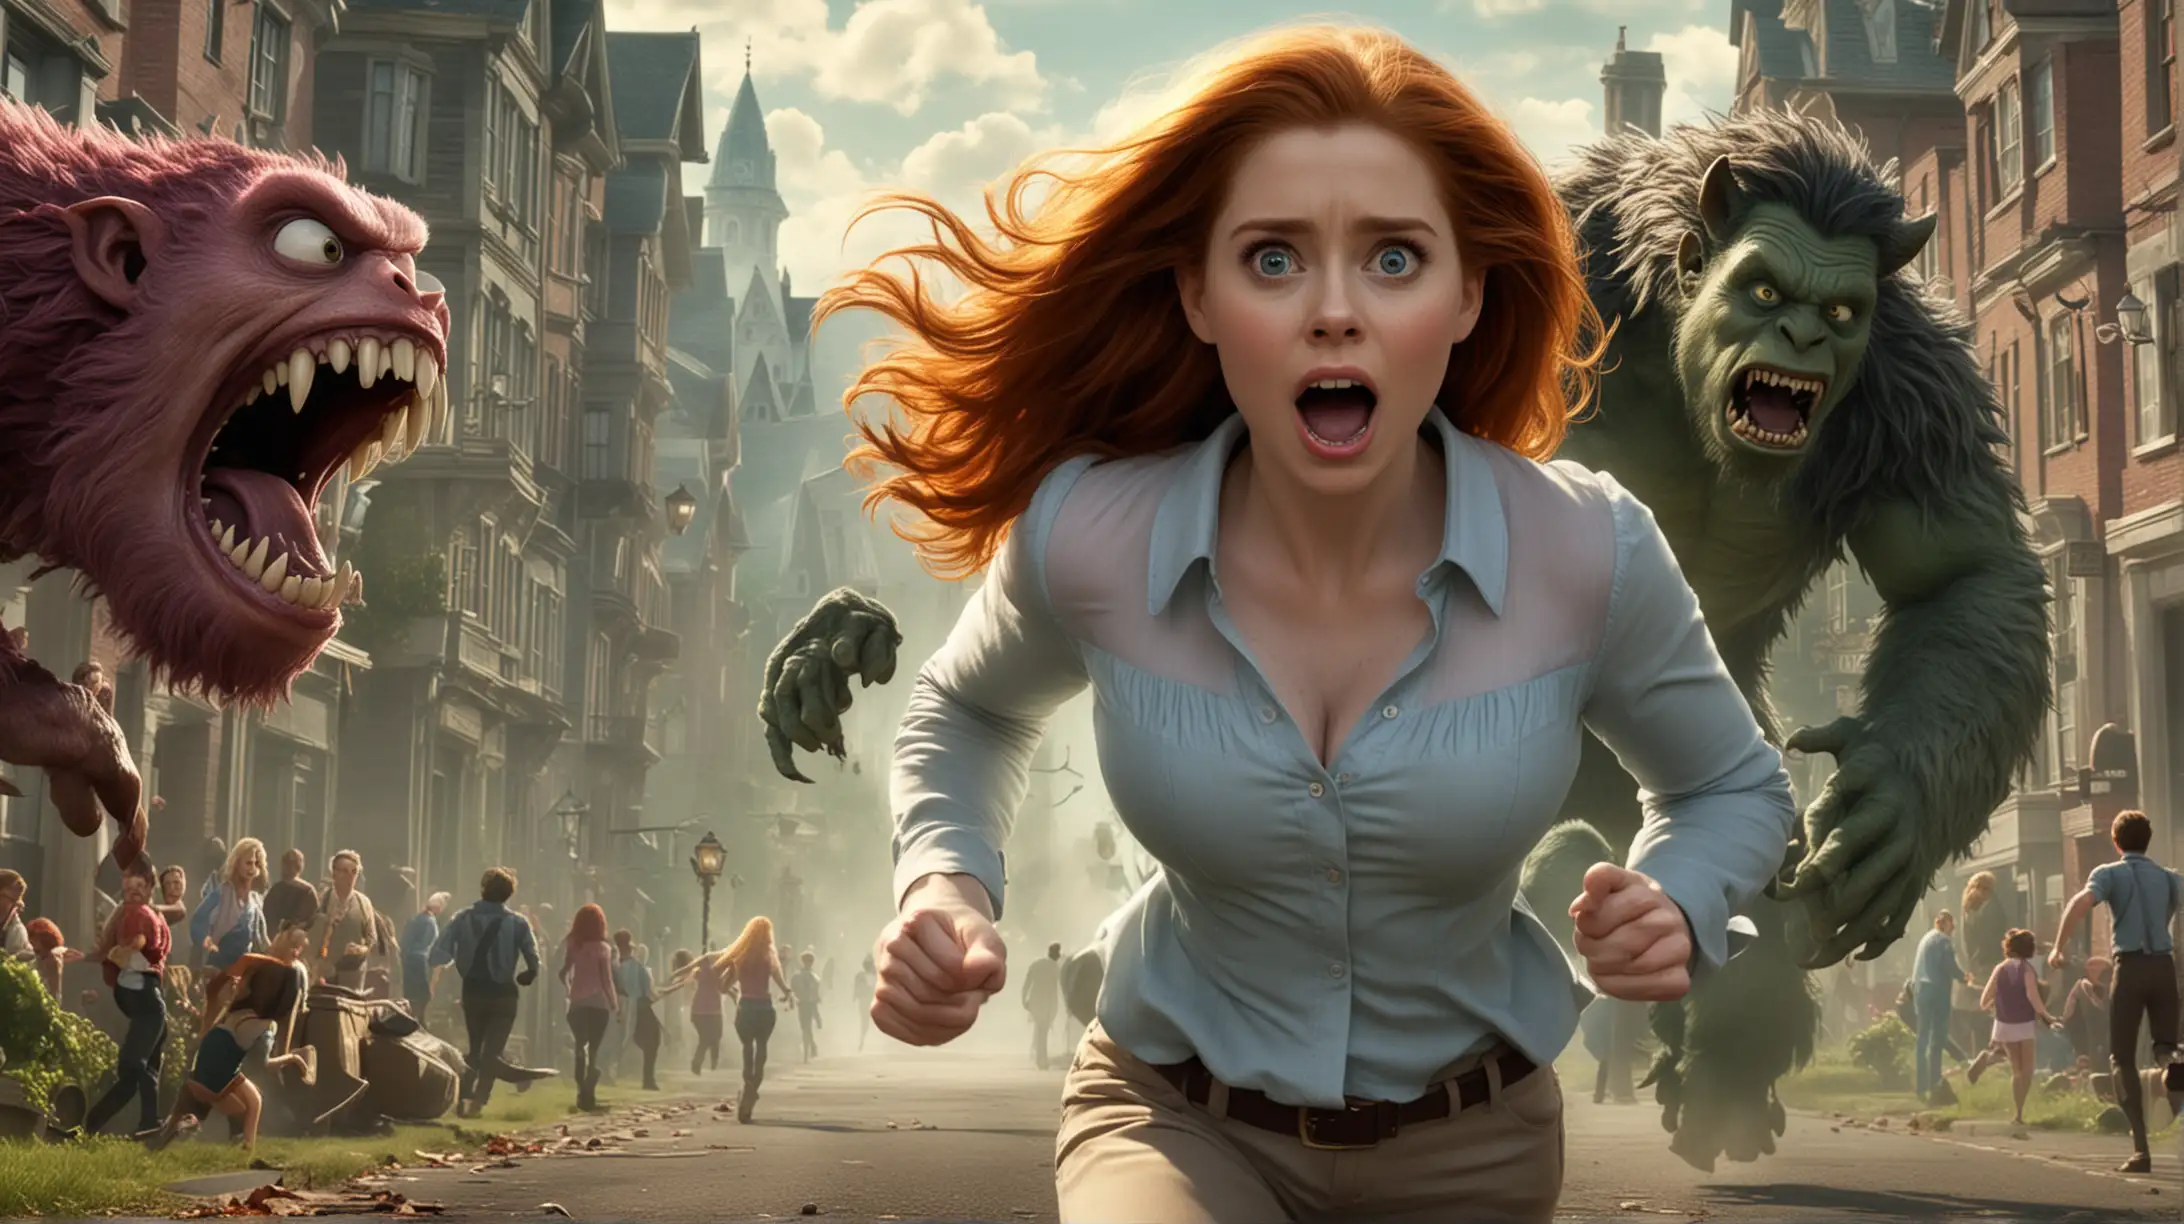 Animated Movie Poster Amy Adams Fleeing from Monstrous Threat in Sensational Attire